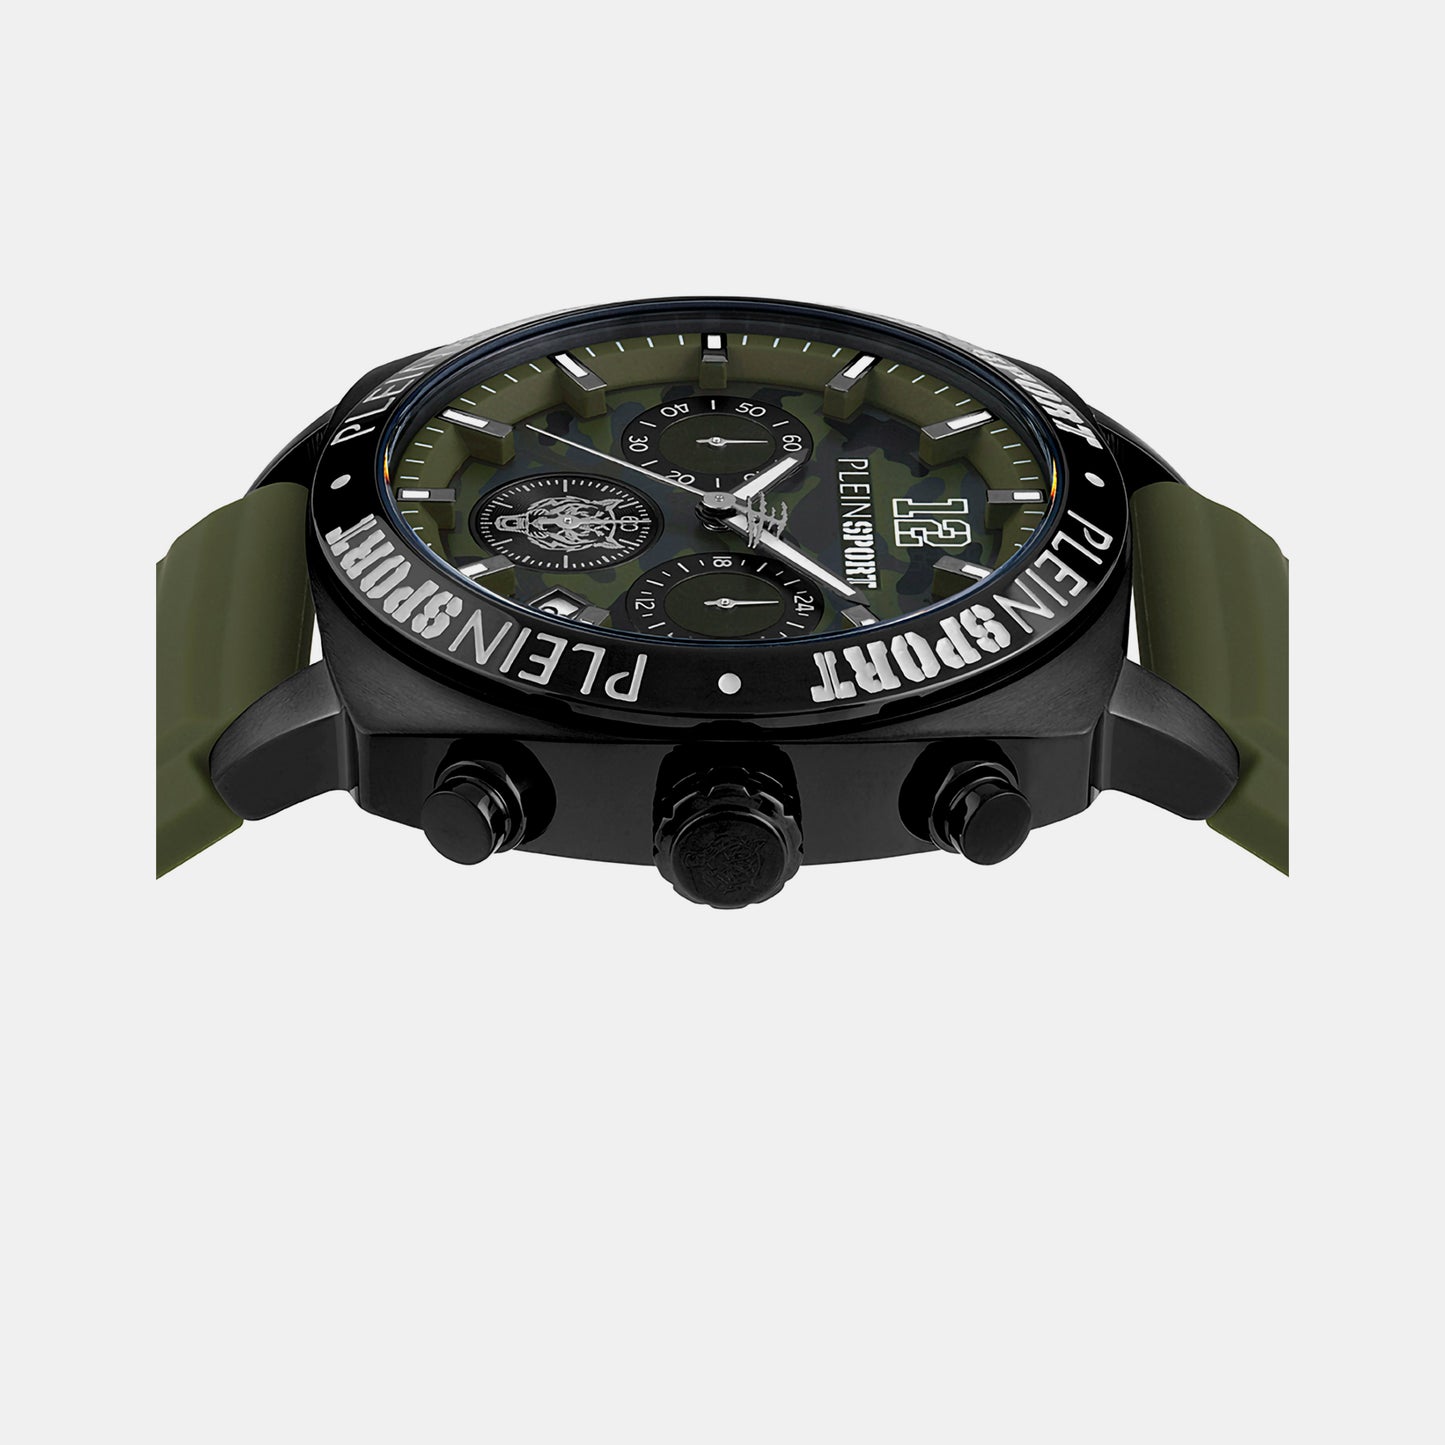 Wildcat Male Green Chronograph Silicon Watch PSGBA0223